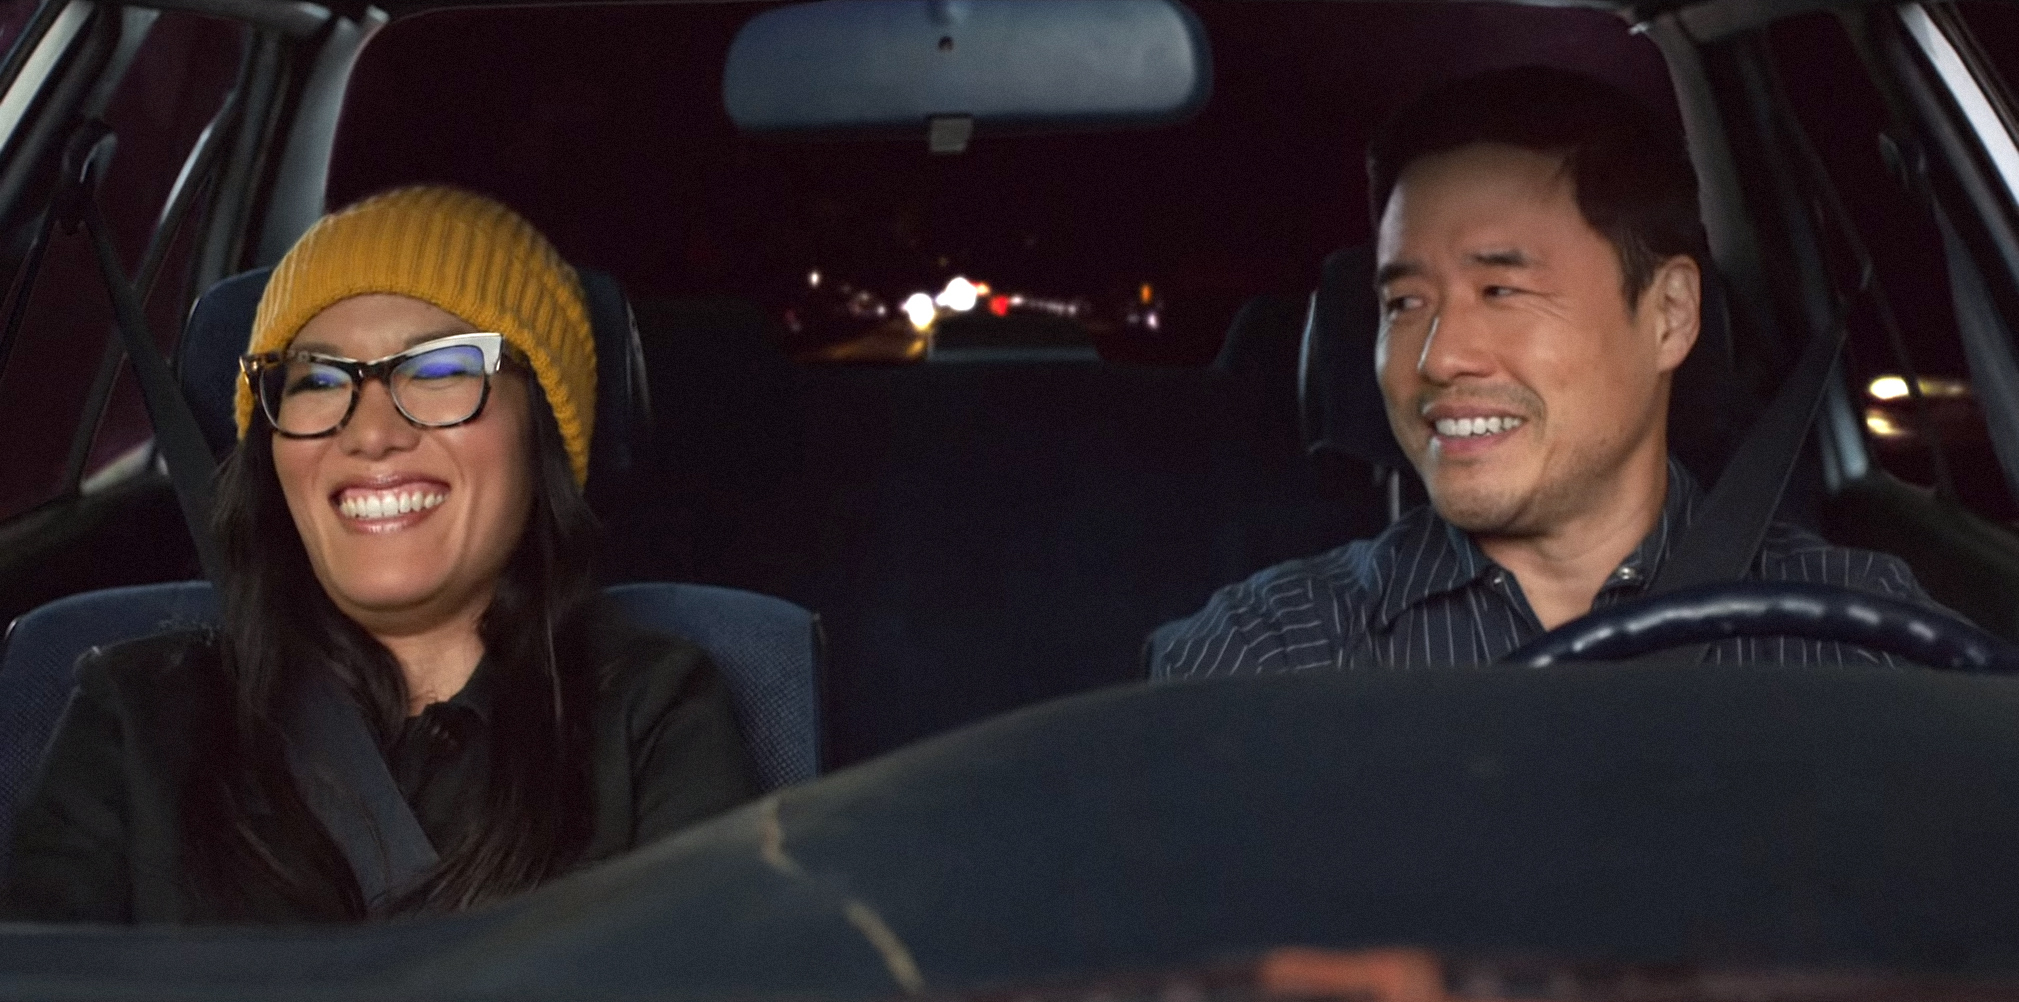 in a scene, Ali and Randall in a car together